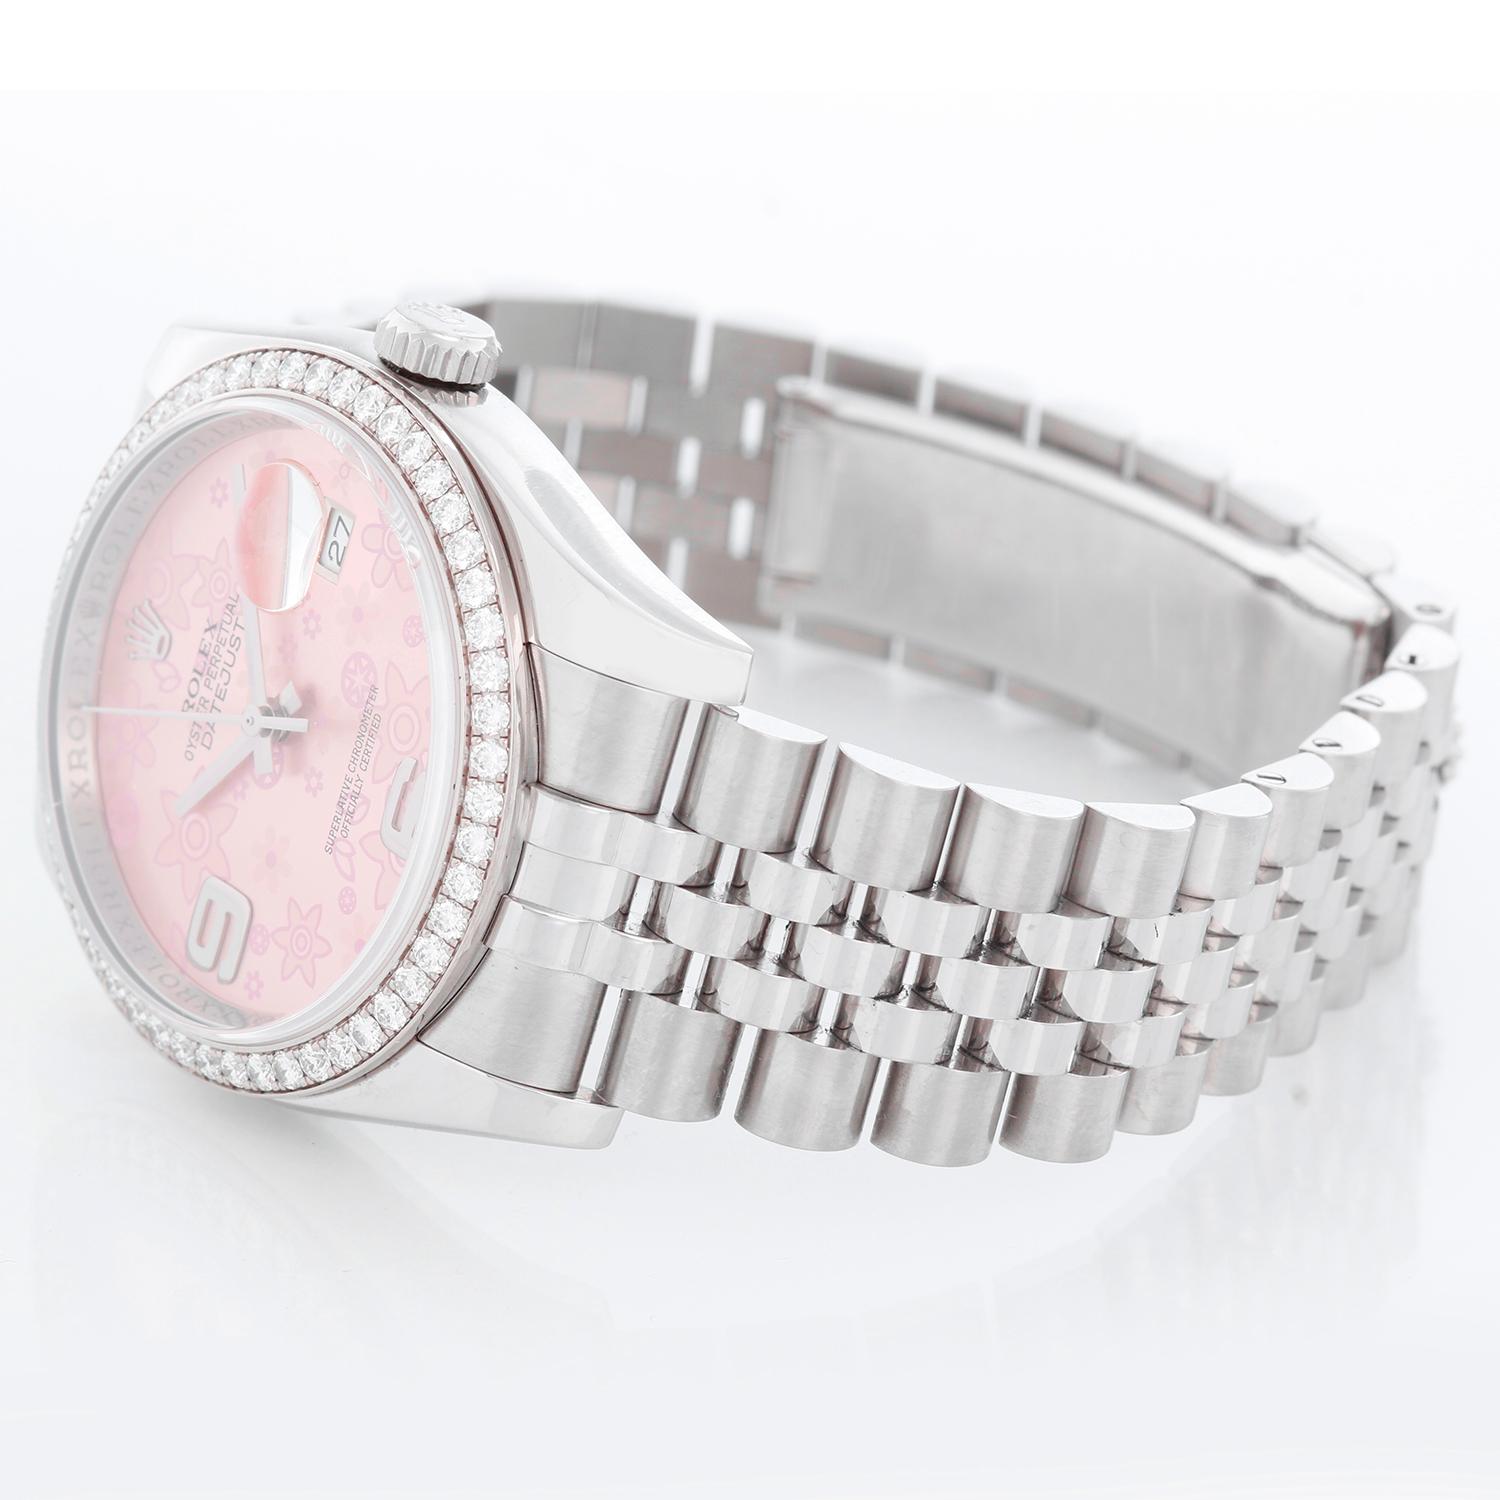 Rolex Datejust Pink Flower Arabic Diamond Bezel Ladies Steel Watch 116244 - Automatic winding, 31 jewels, Quickset, sapphire crystal. Stainless steel case with factory 52 diamond and 18k white gold bezel  (36mm diameter). Pink flower dial with